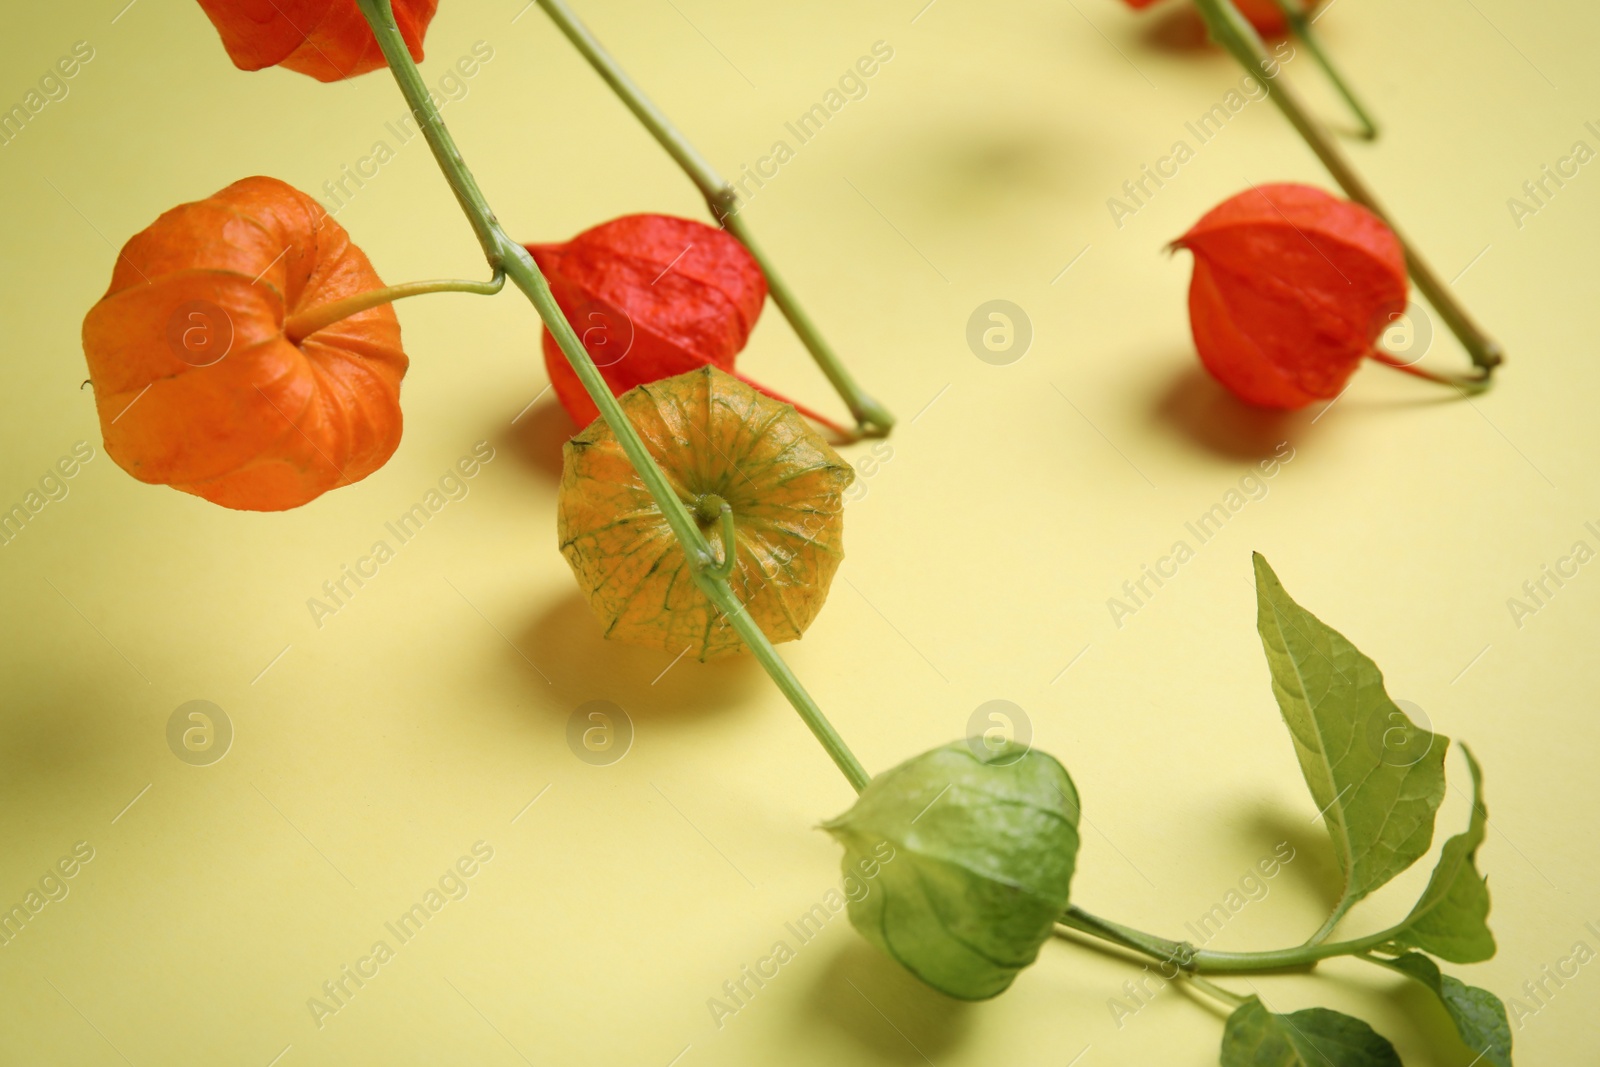 Photo of Physalis branches with colorful sepals on yellow background, closeup